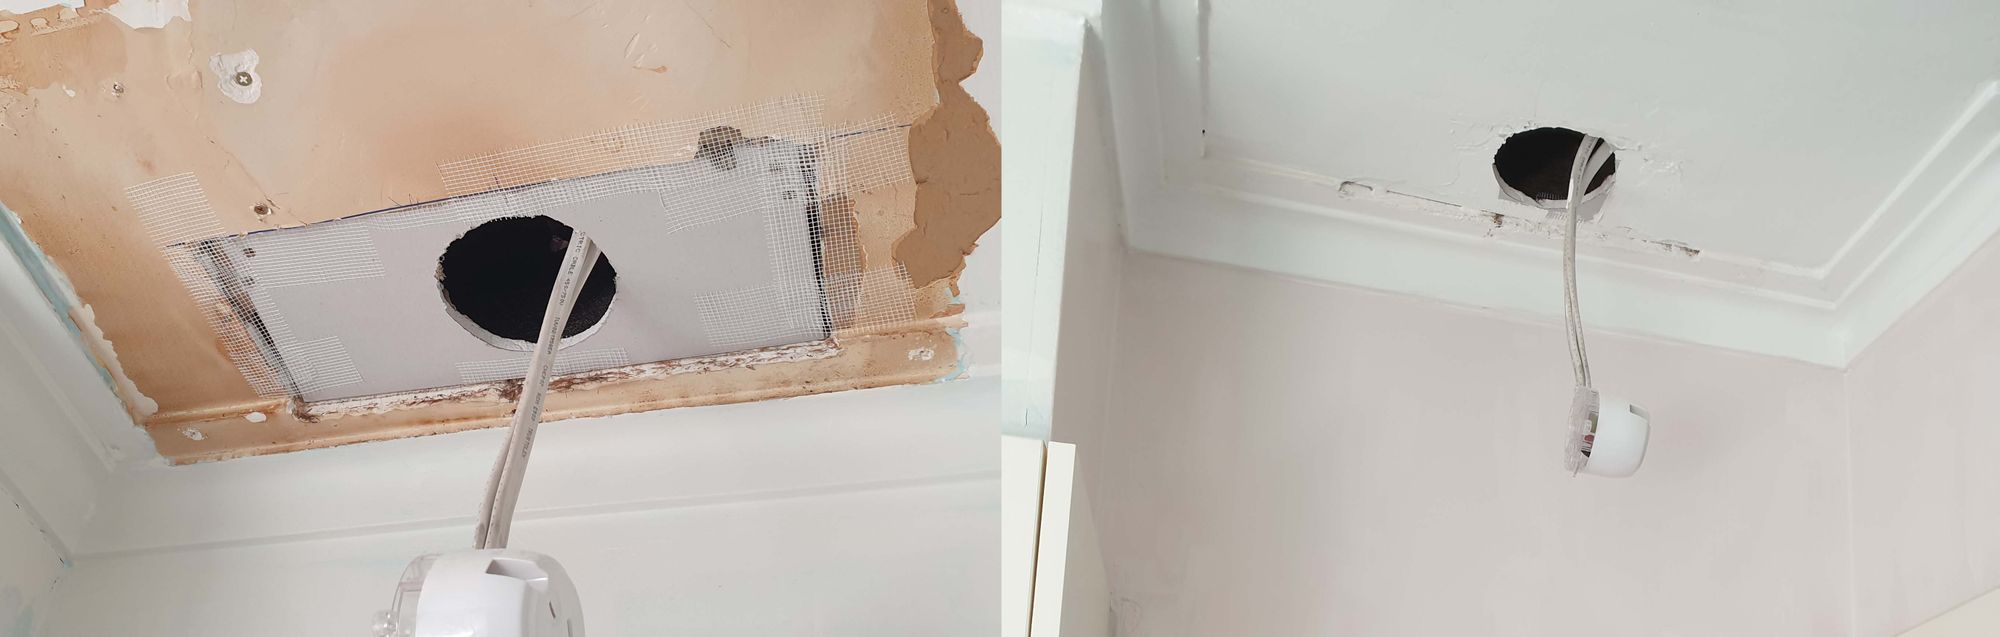 2 photos showing a ceiling repair - the first is unpainted, the second is painted and plastered